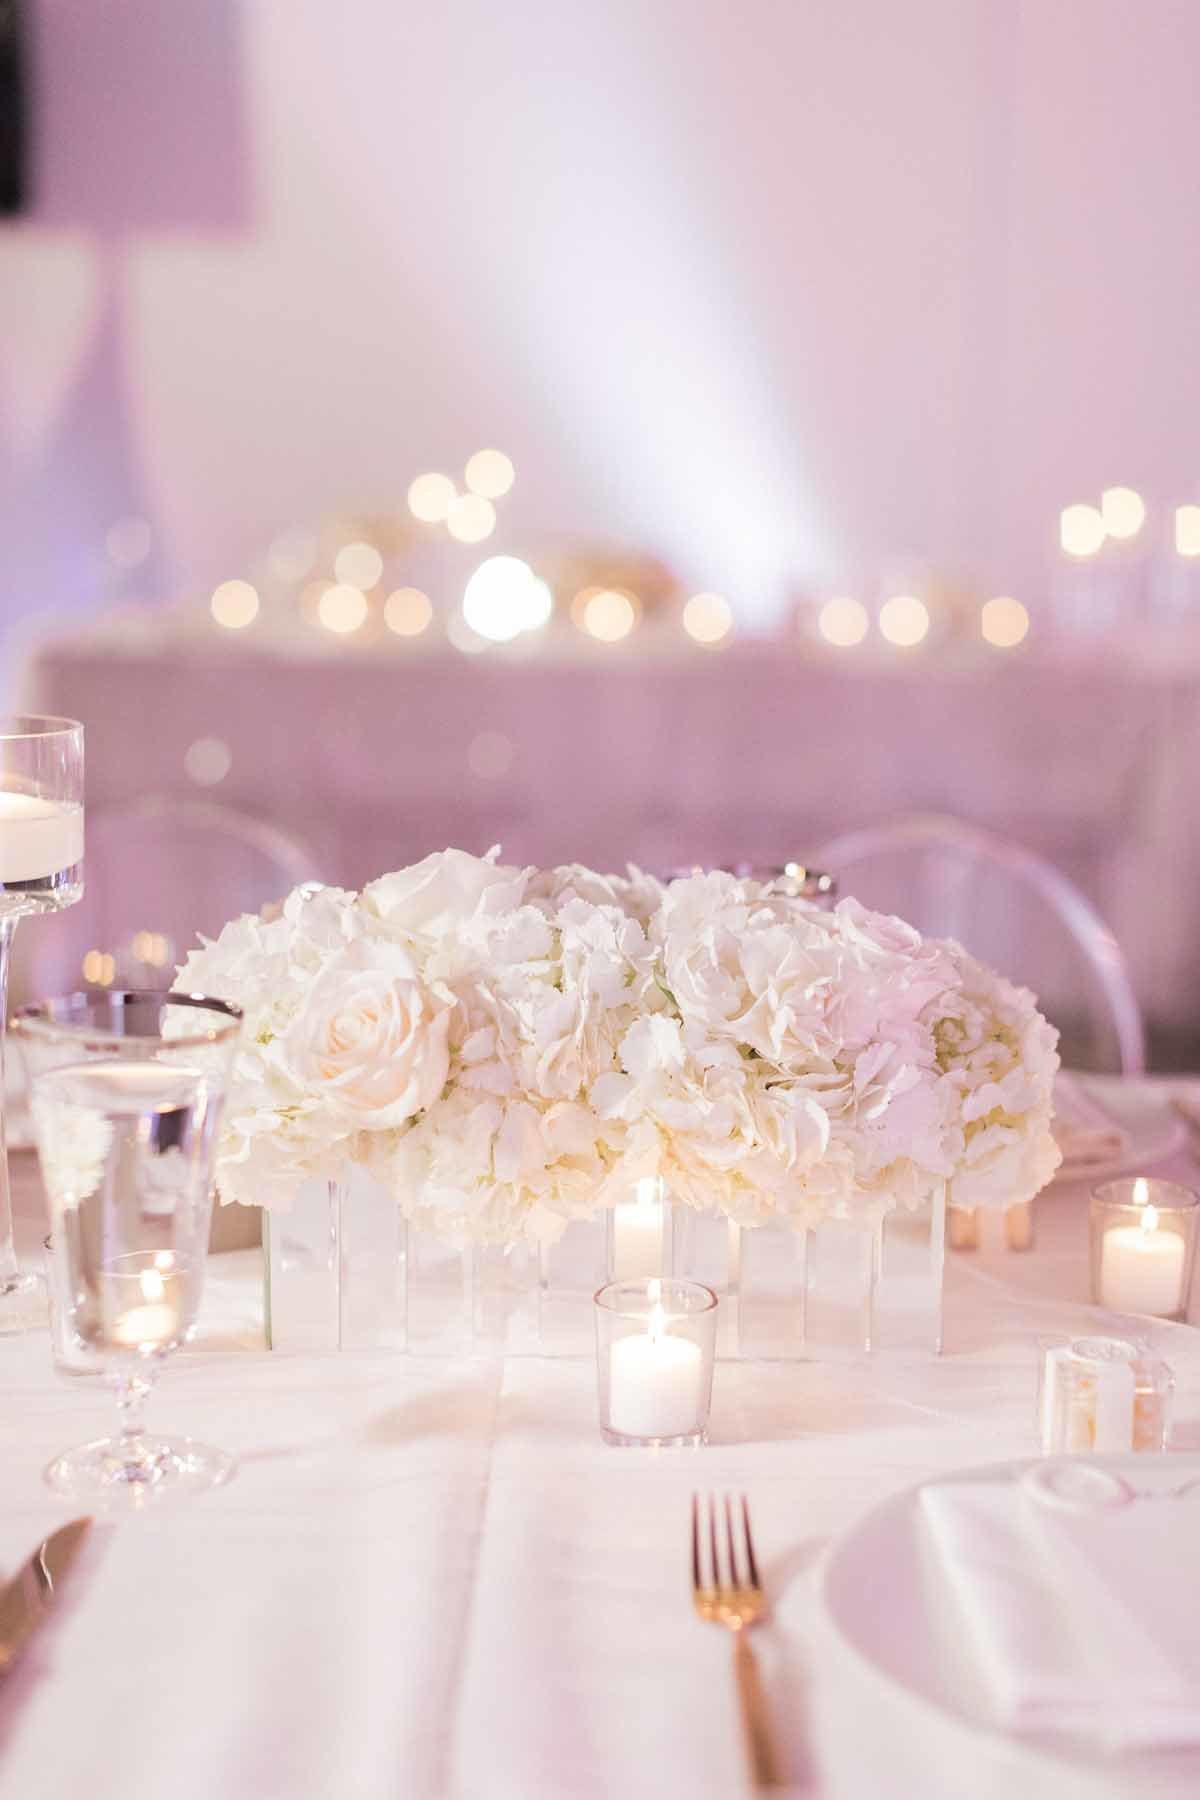 White hydrangea and rose arrangement lit by hundreds of candles is so romantic for a reception look.